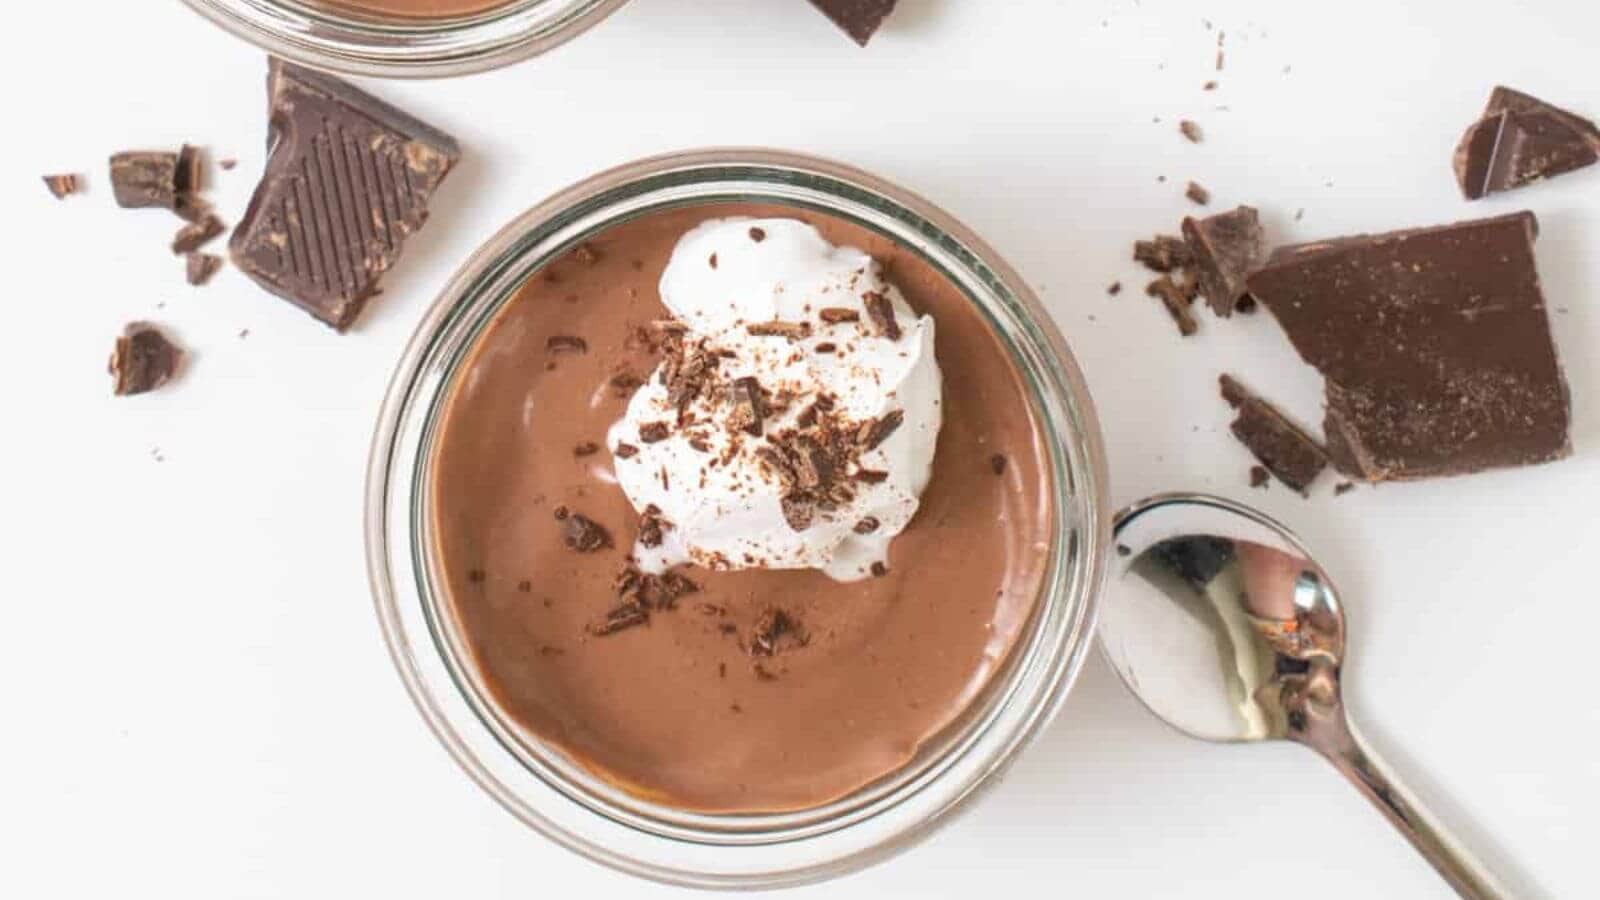 Vegan chocolate mousse in a bowl.